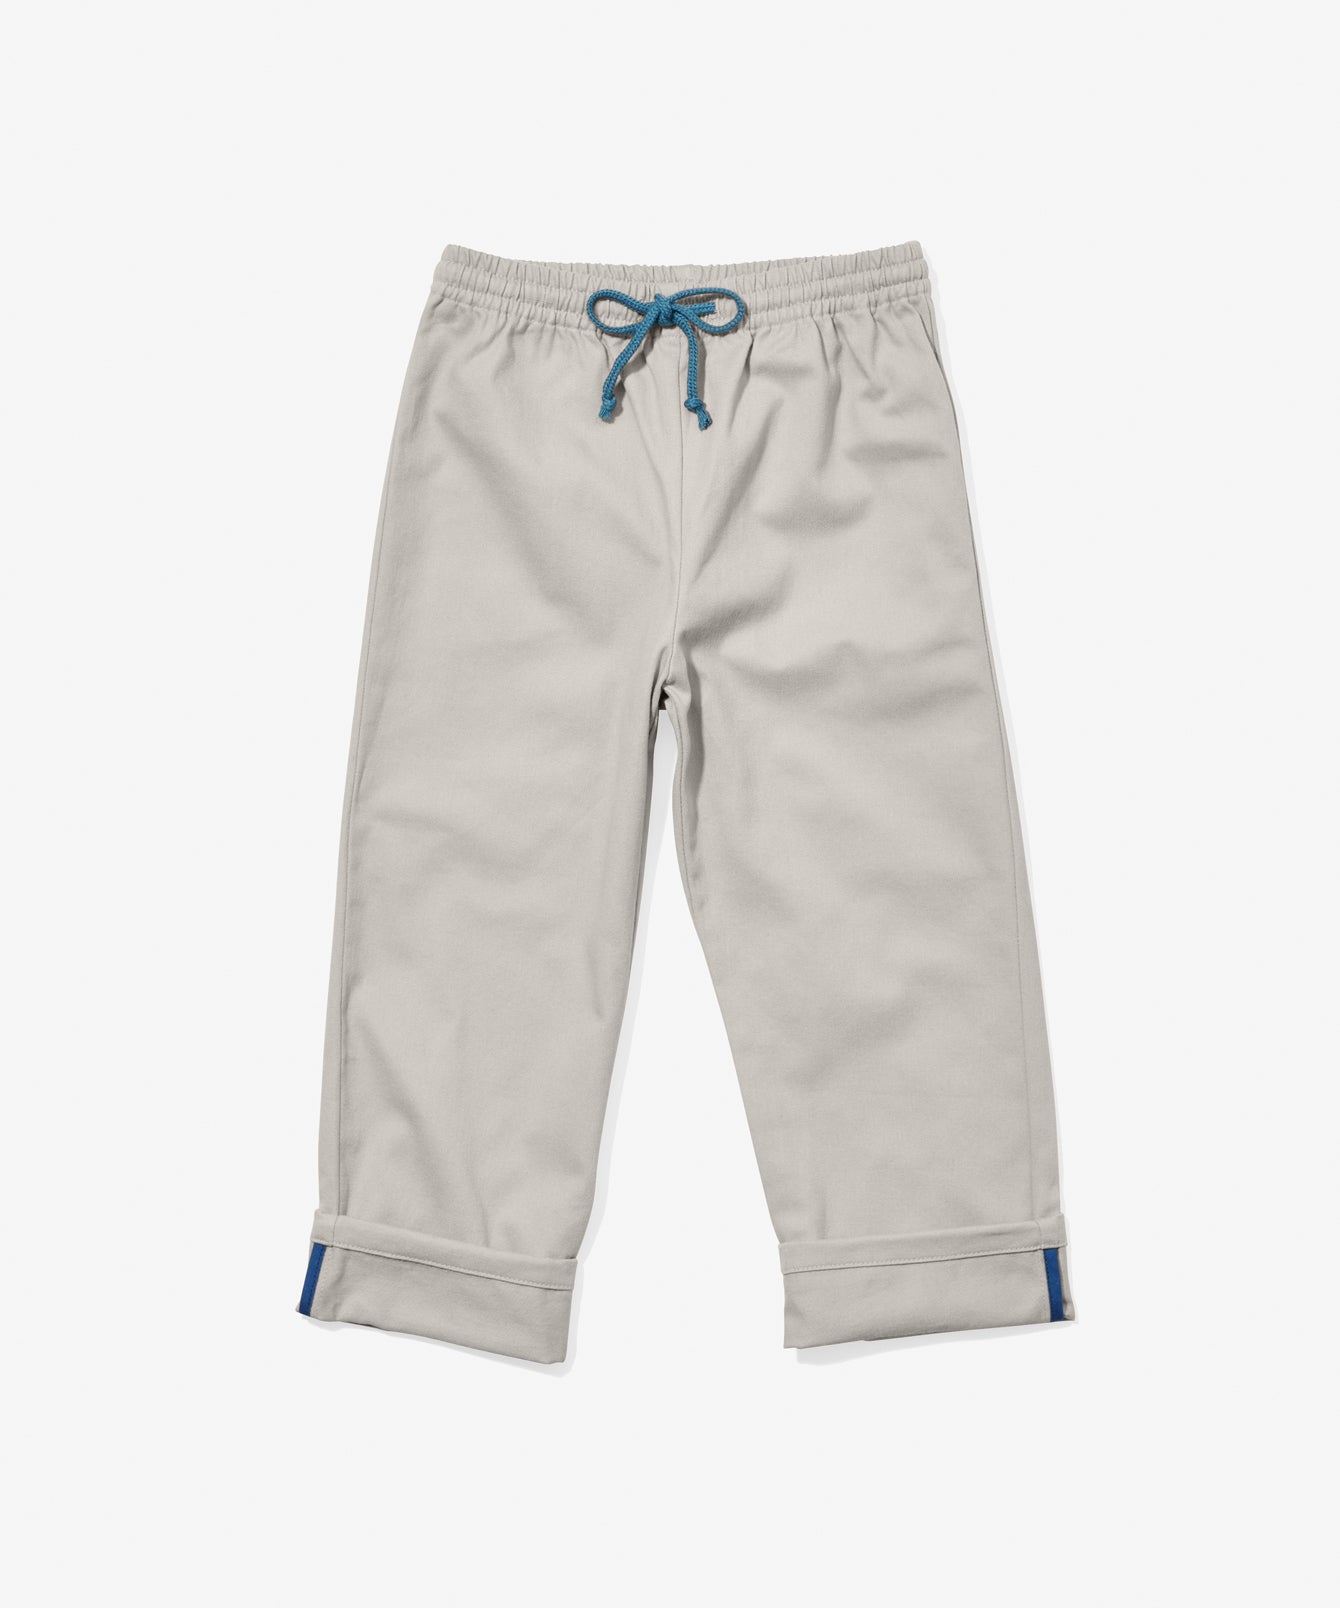 Stylish Child's Pant with Drawcord Waist | Oso & Me